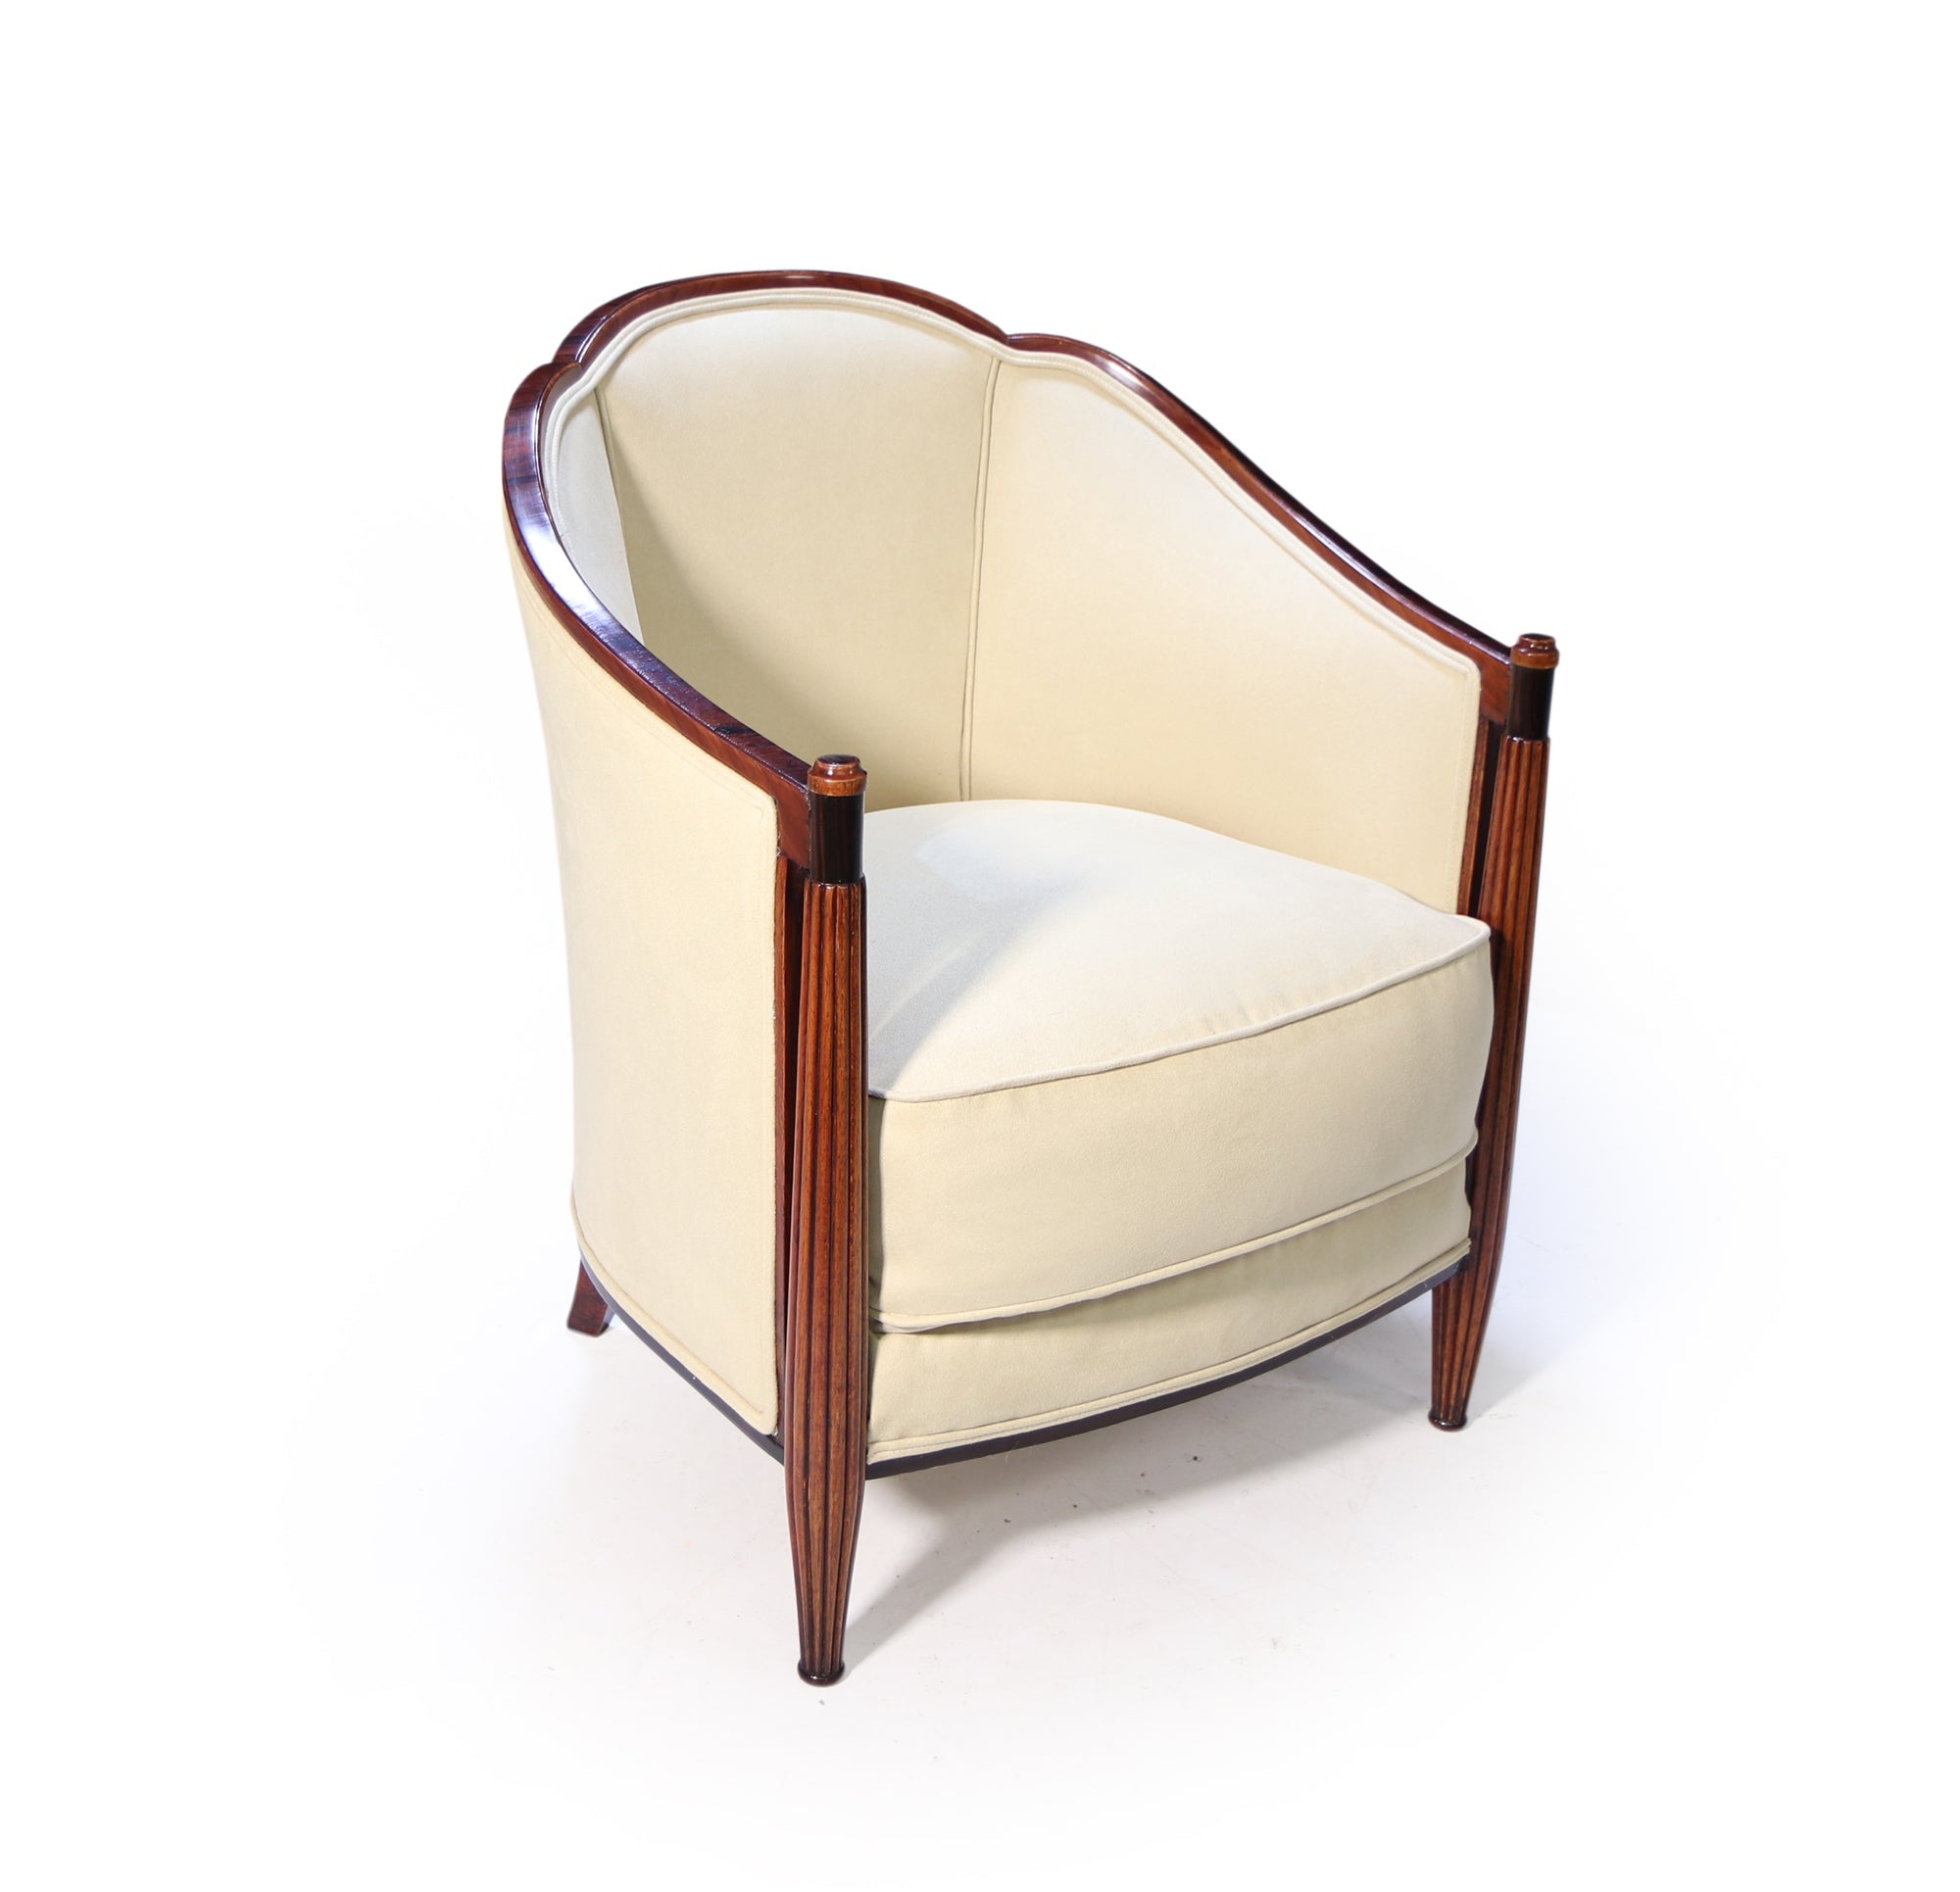 Art Deco Armchairs Restored And Upholstered – Thefurniturerooms